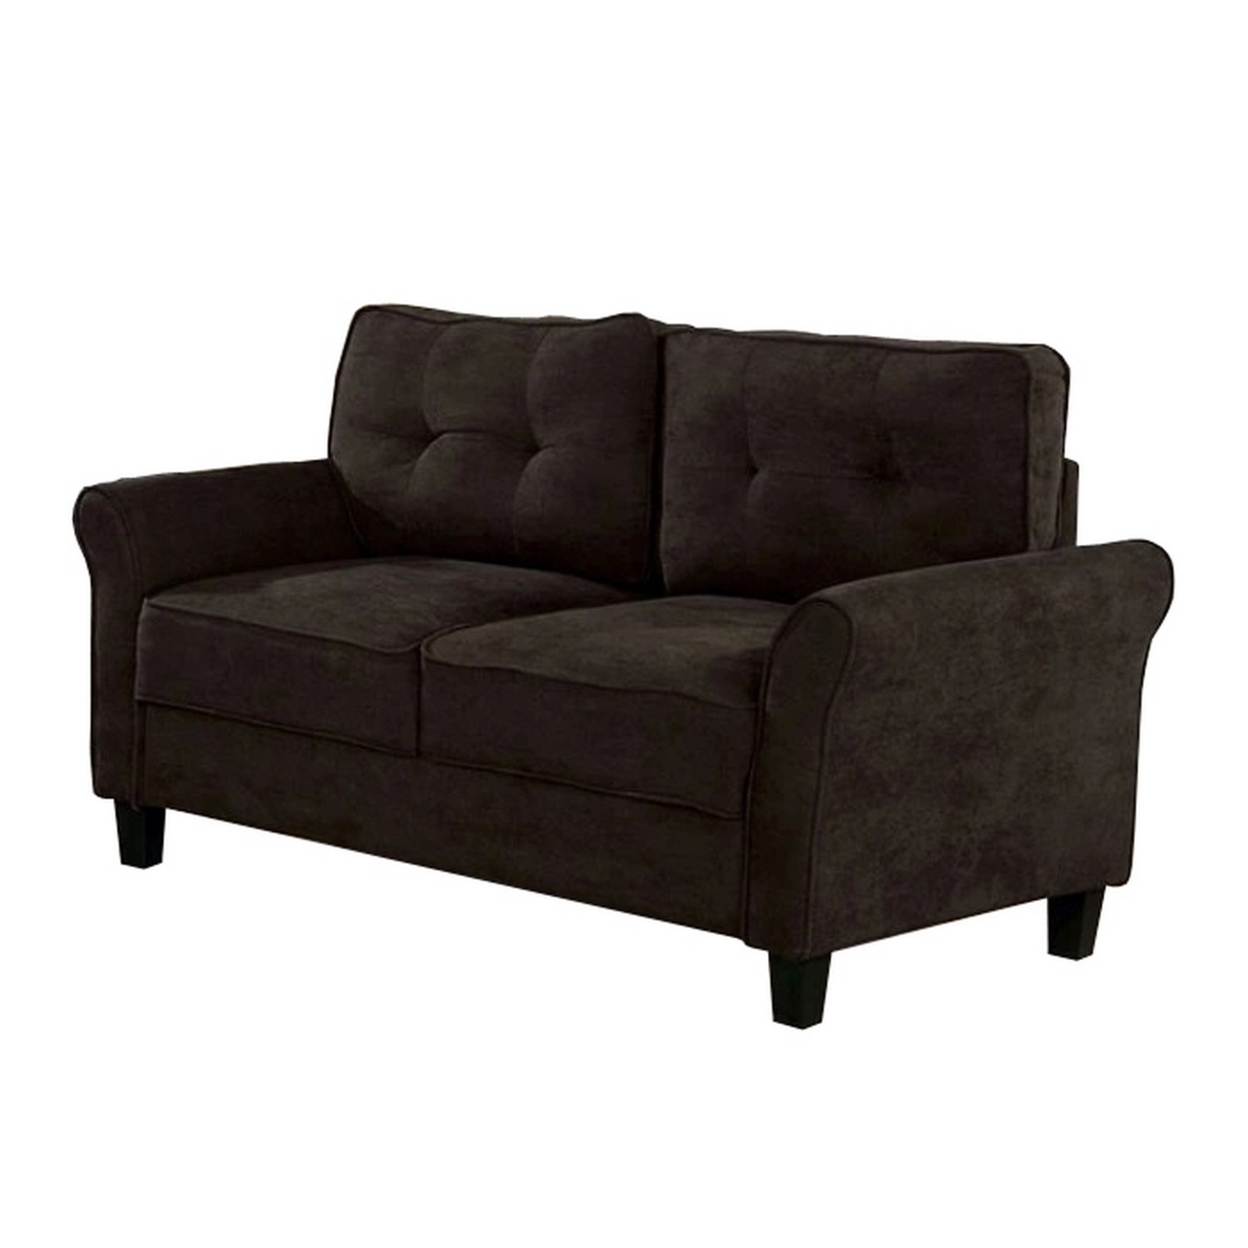 Loveseat With Knit Fabric With Flared Armrests, Brown- Saltoro Sherpi